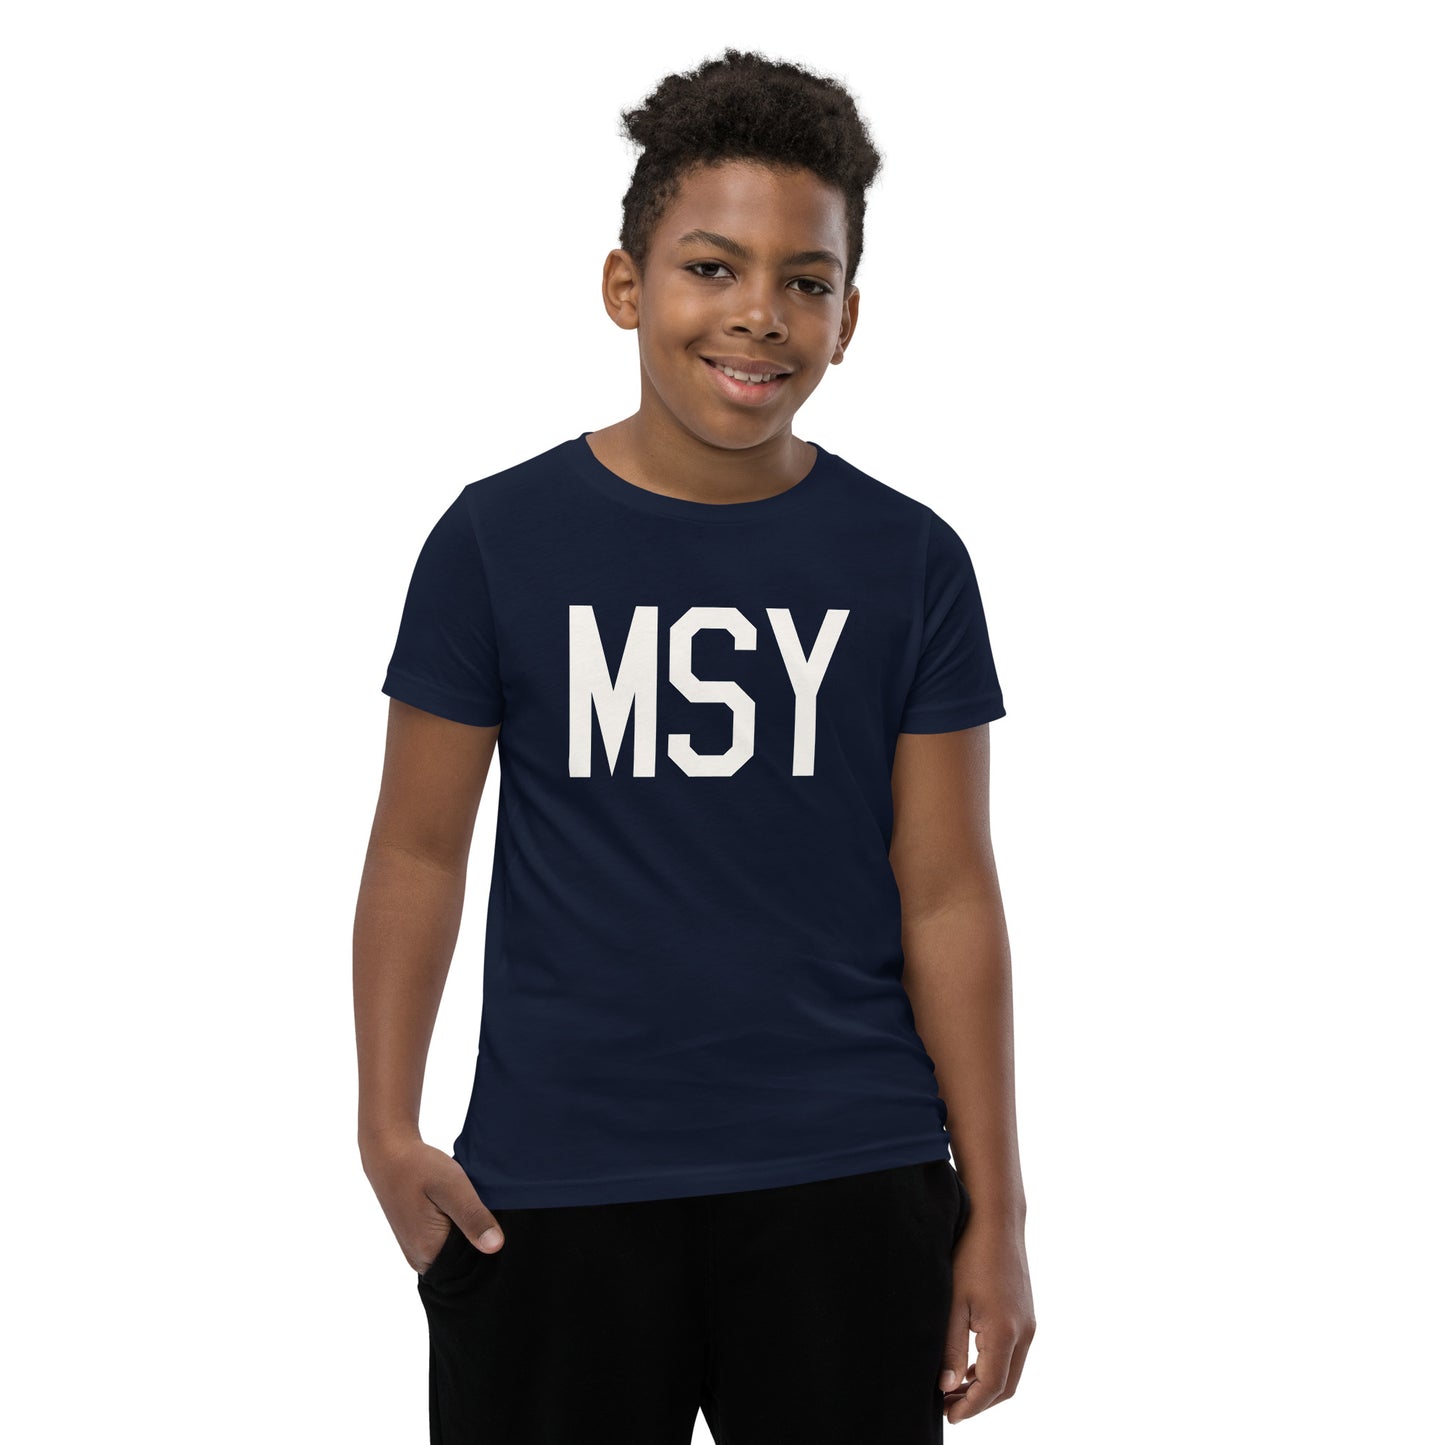 Kid's T-Shirt - White Graphic • MSY New Orleans • YHM Designs - Image 01